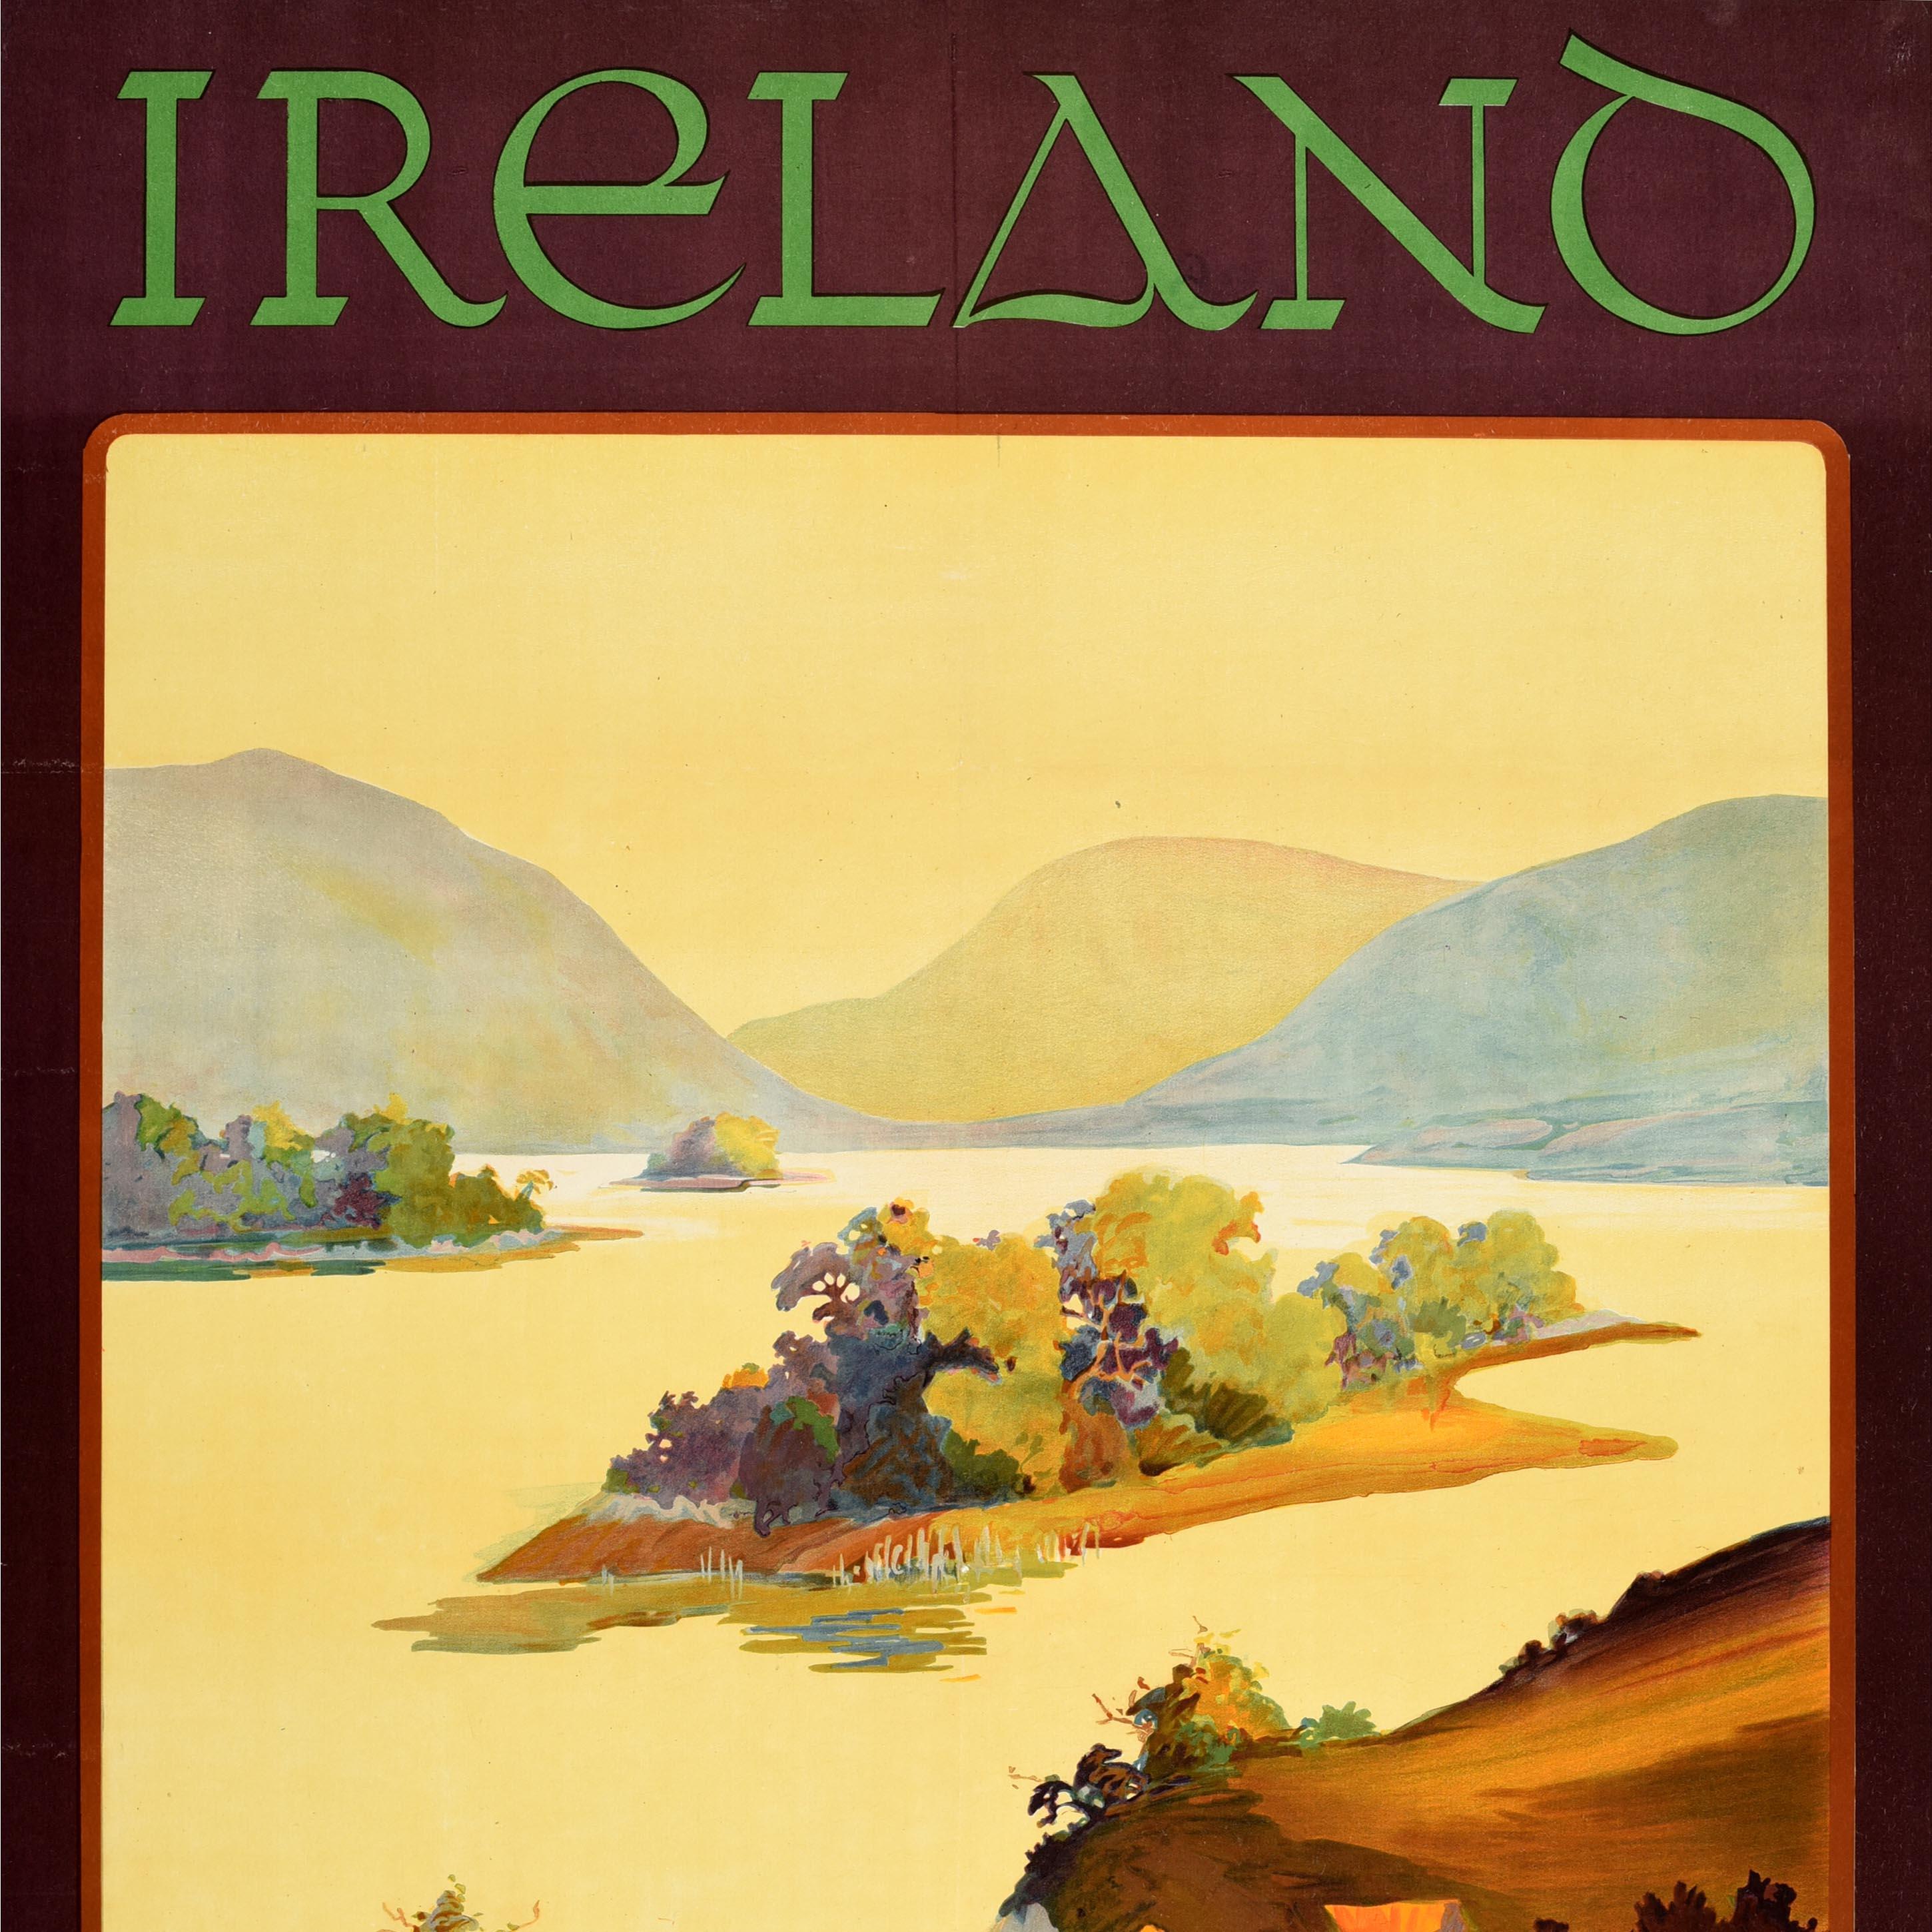 Original Vintage Travel Poster Ireland Come Back To Erin Anchor Line Cruise Ship - Beige Print by Unknown